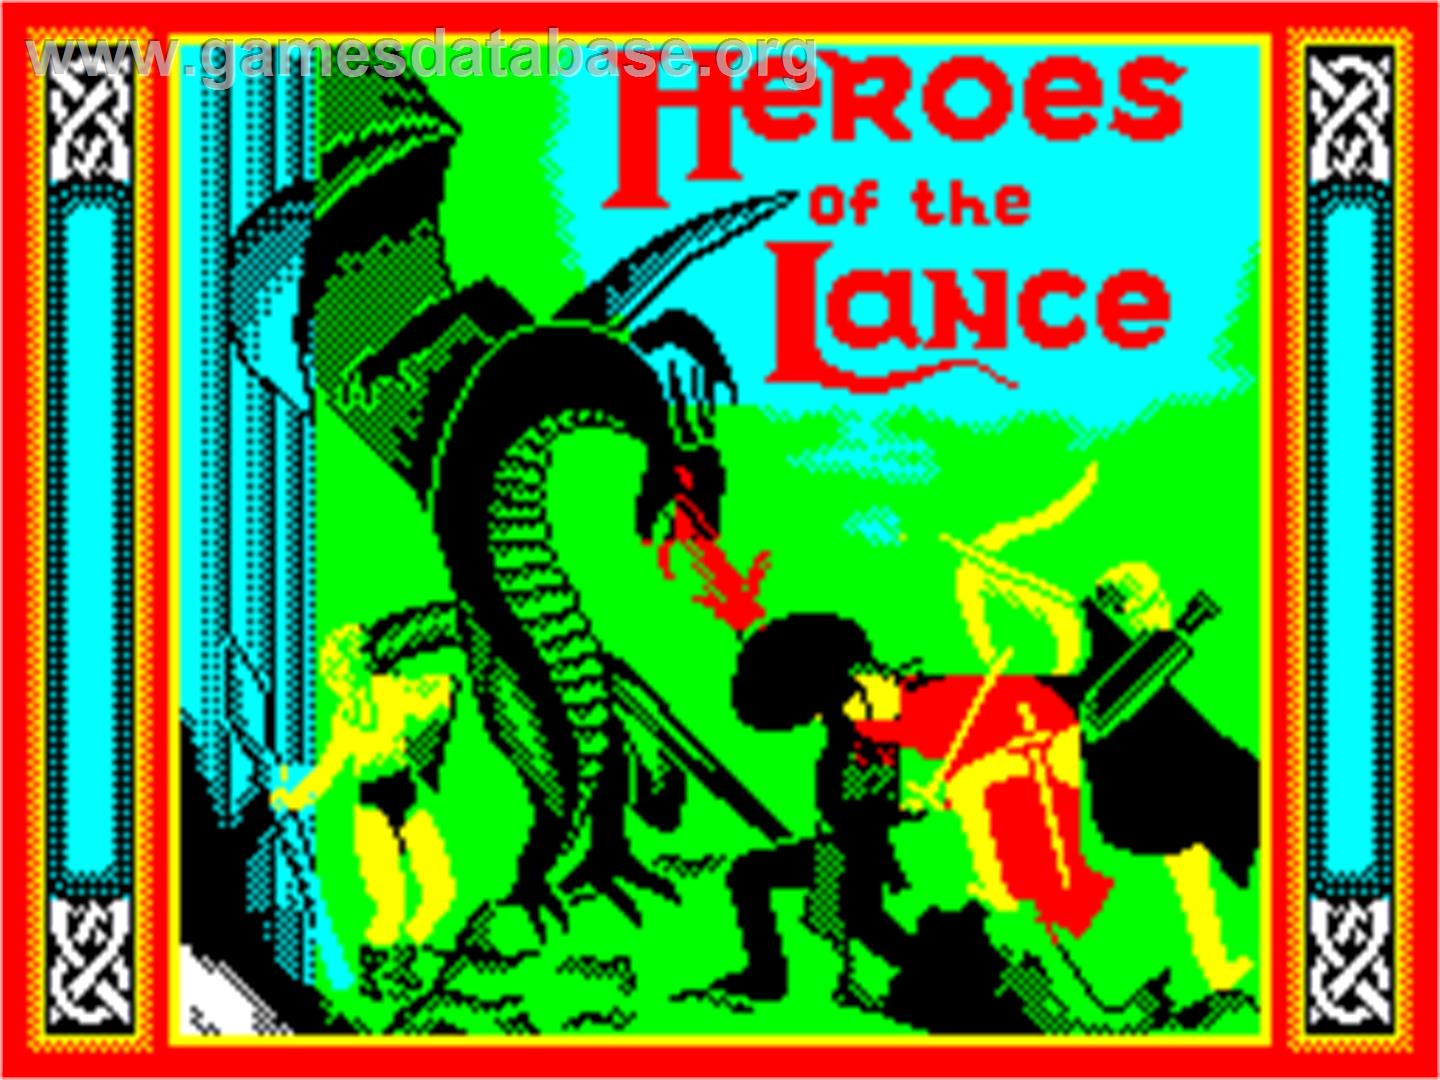 Heroes of the Lance - Sinclair ZX Spectrum - Artwork - Title Screen